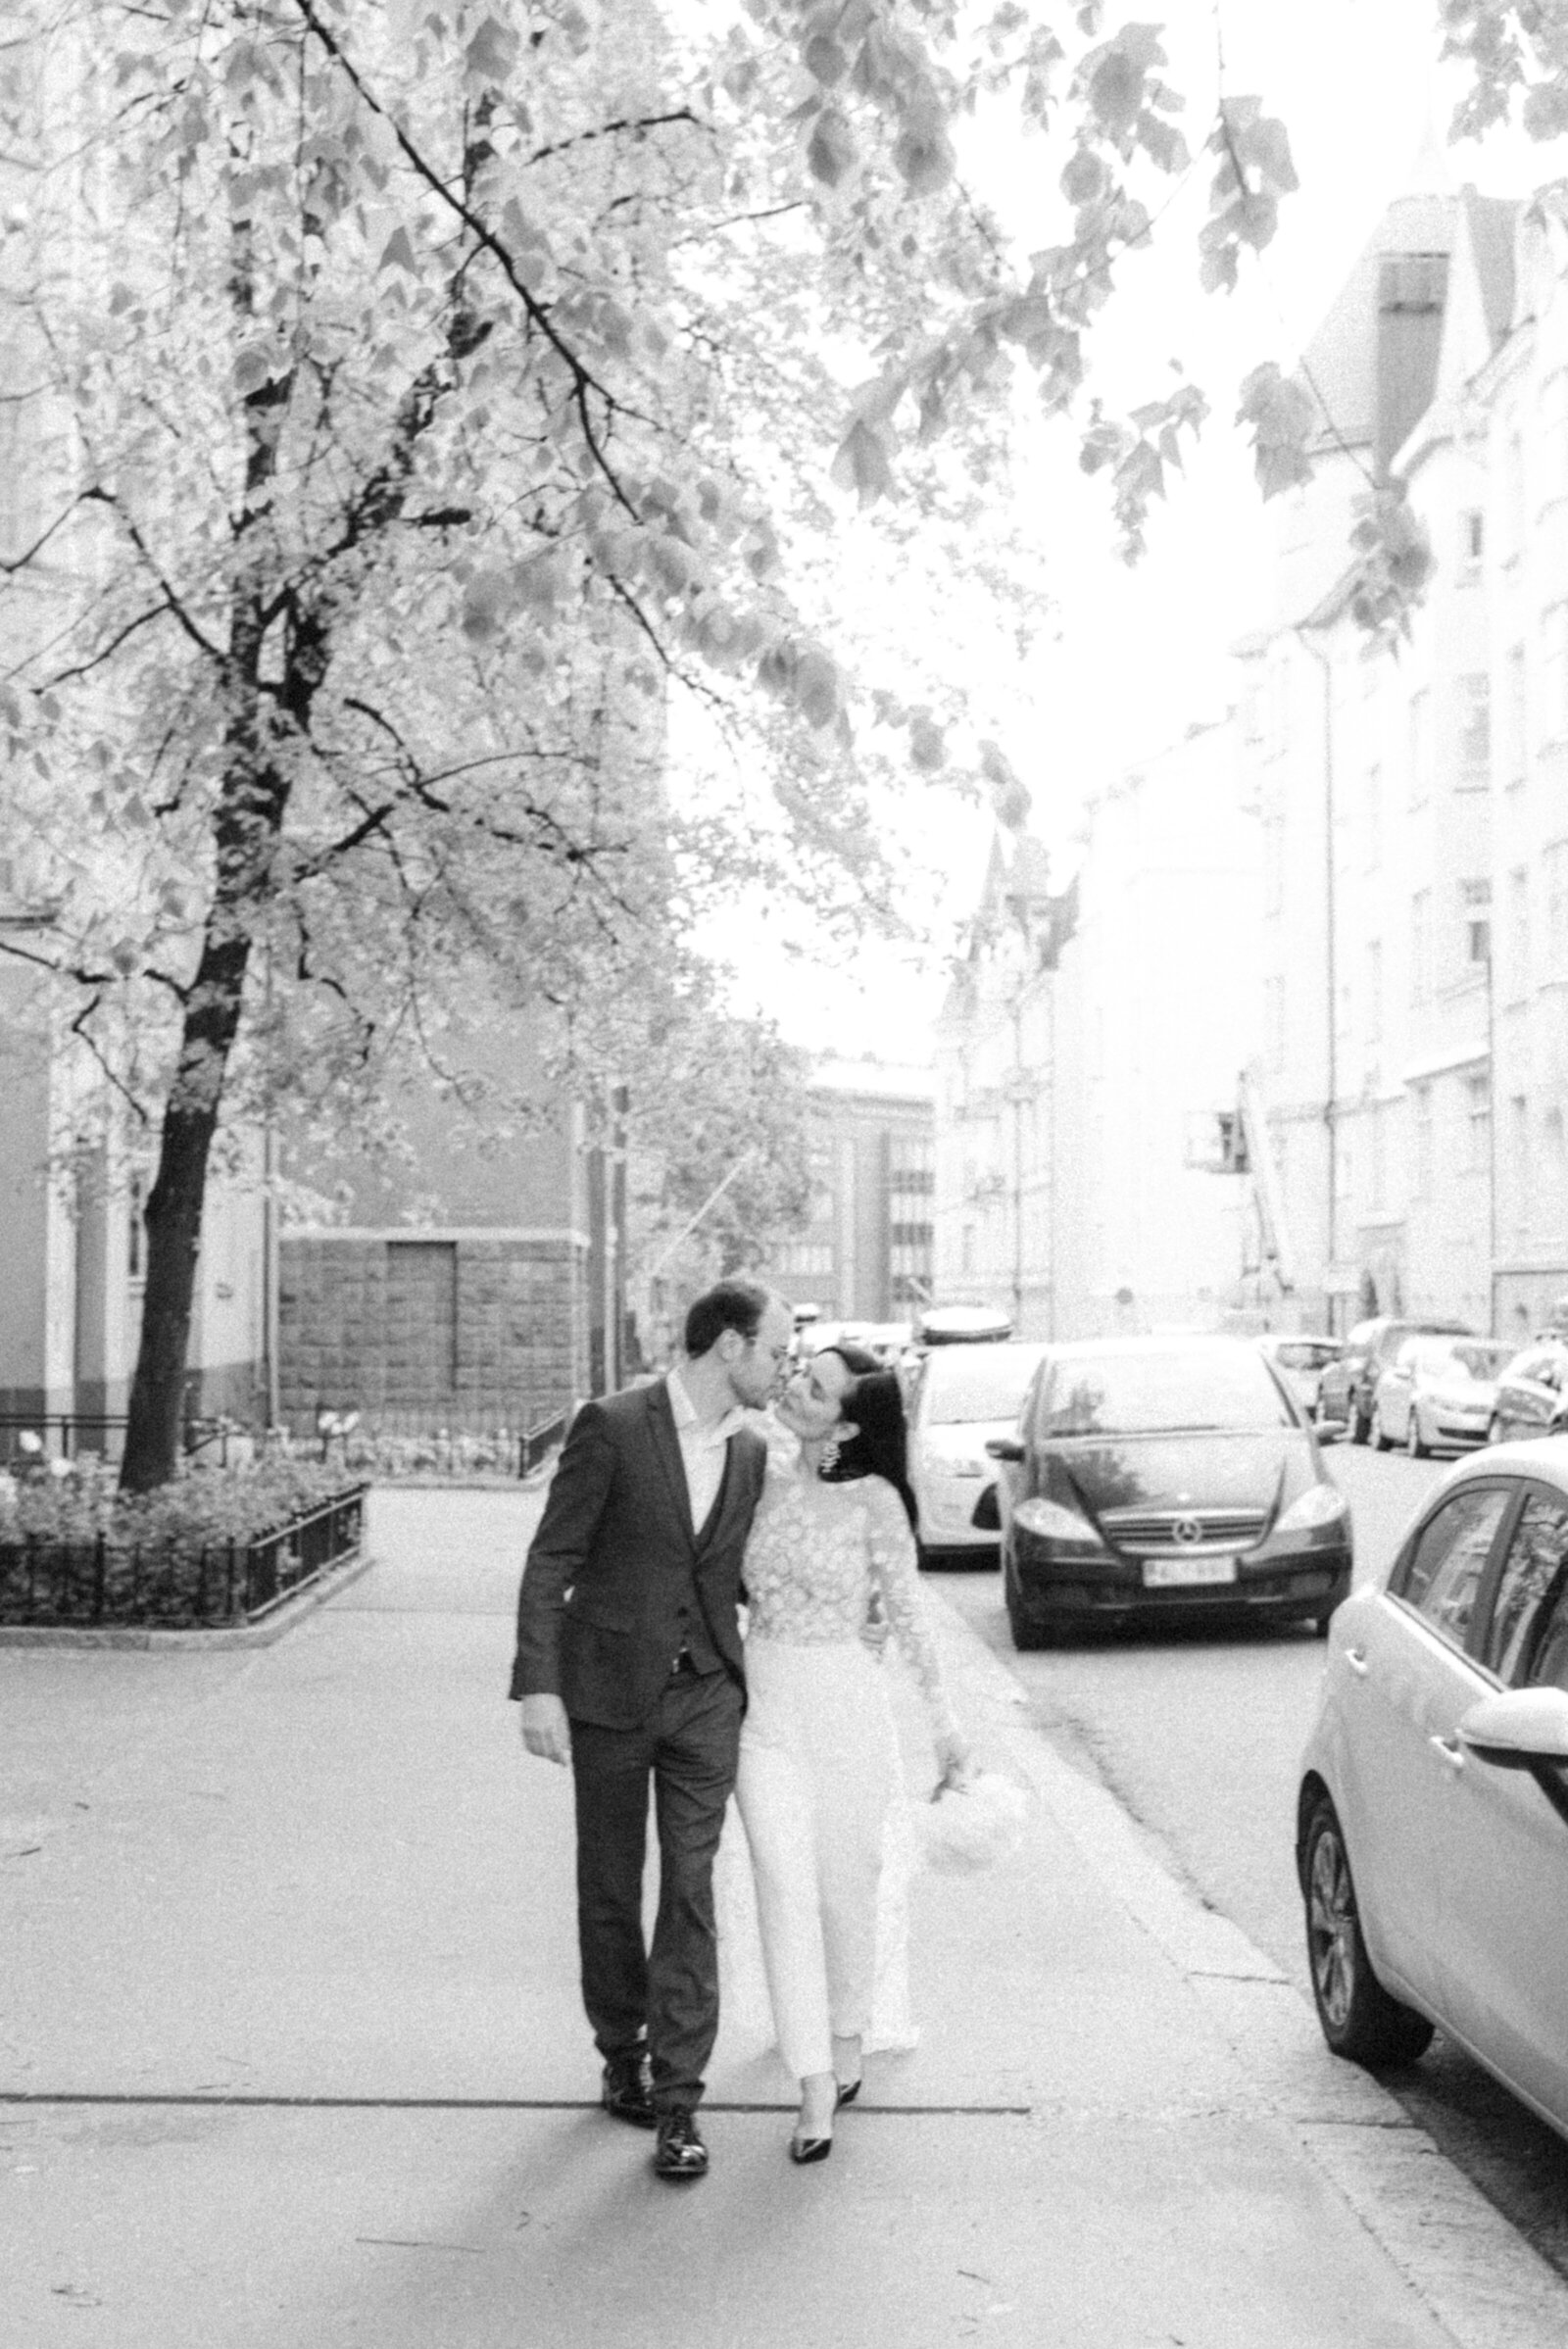 Elegant and madly in love  wedding couple walking on the street in Helsinki. European elopement photographer Hannika Gabrielsson photographed this image in spring.